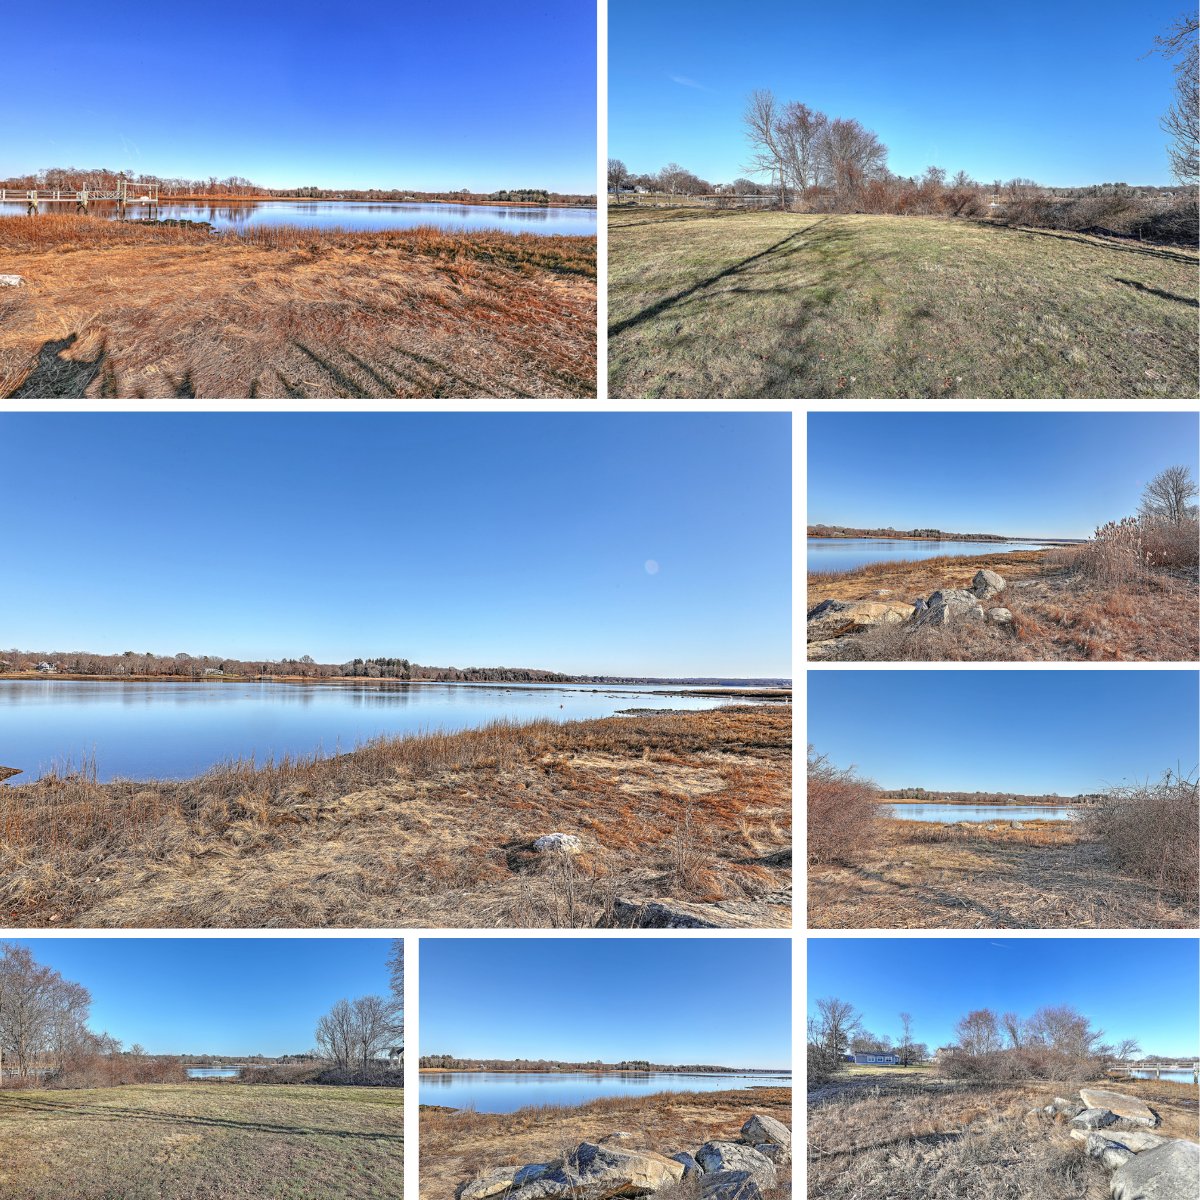 #build your #dreamhome 🏠 on this protected inlet on the #kickemuitriver in #warren.  This #bucolic #waterfront lot is just under an acre waiting for you to build!  Call me at 401-835-2605.

#rplhomes #warrenri #waterviews #rhodeisland #landforsale #rirealtor #heyrhody